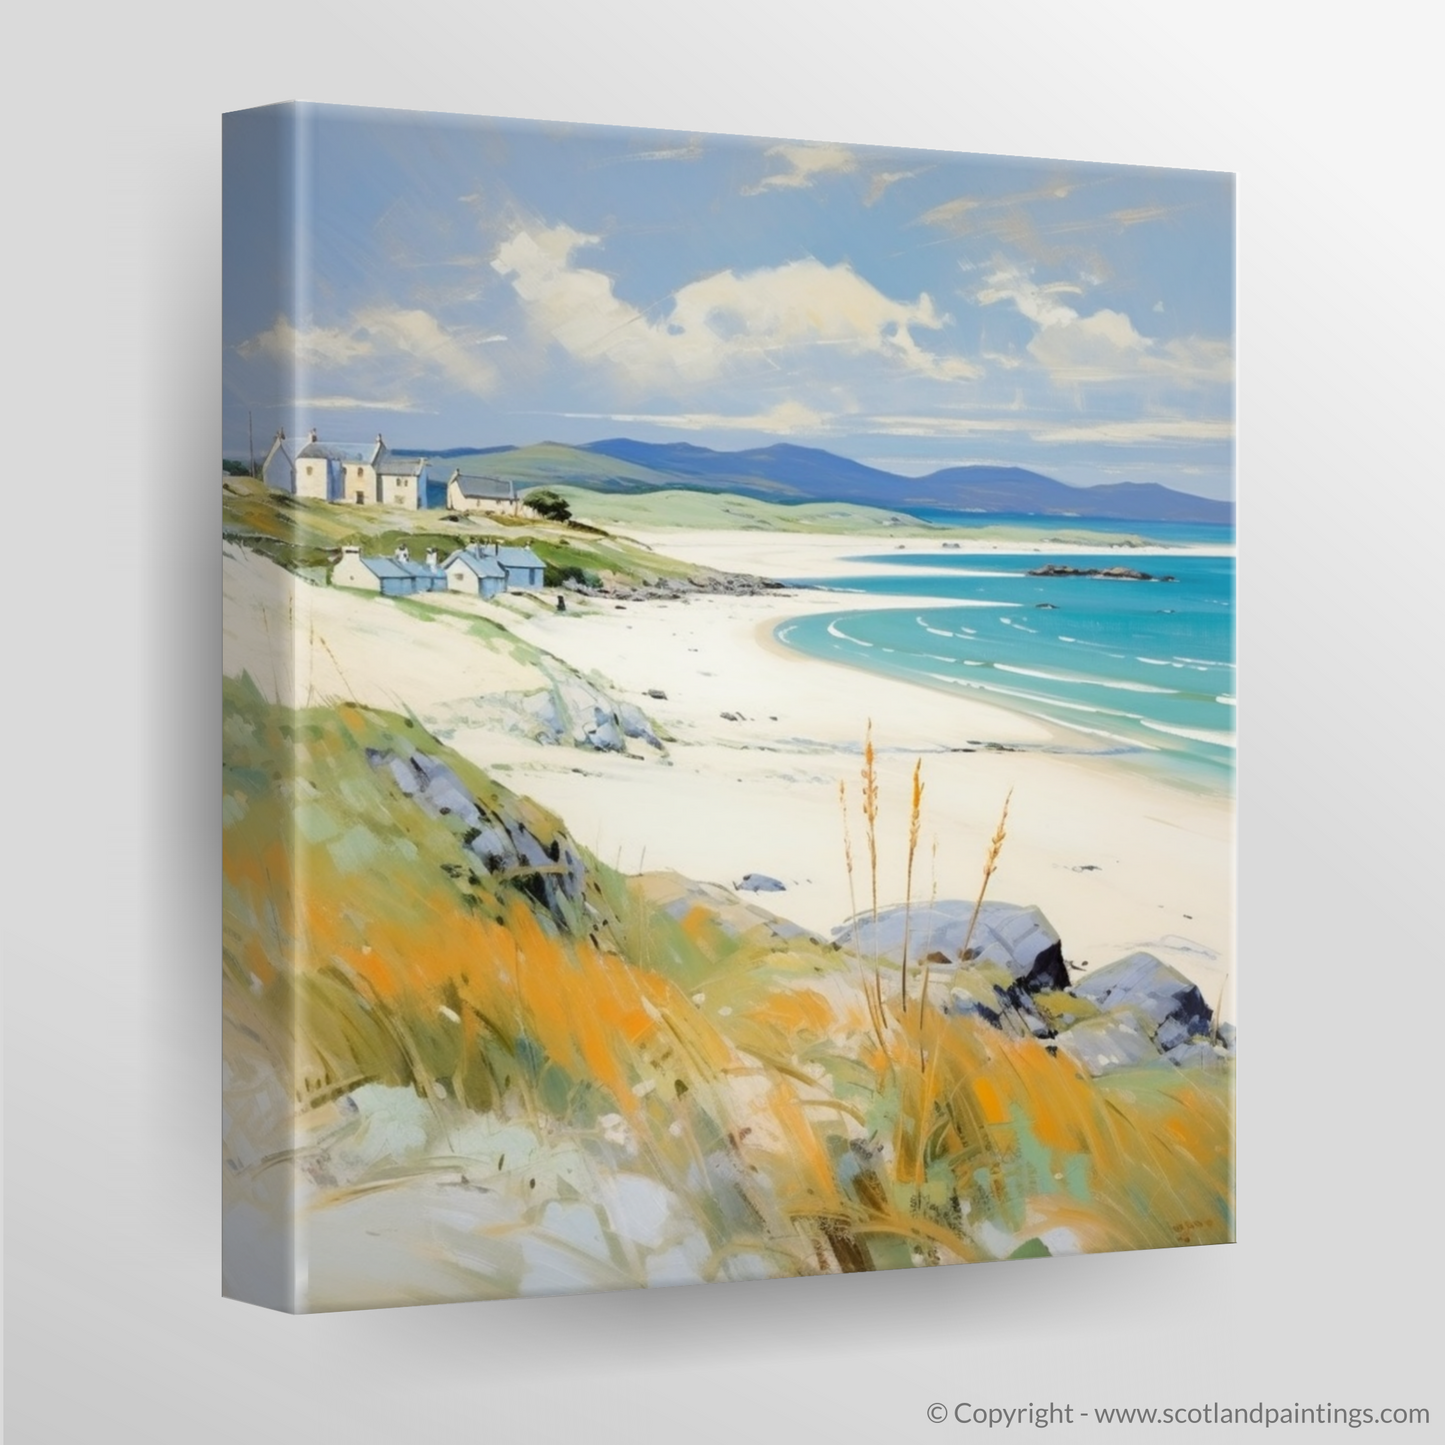 Escaping to Traigh Mhor: A Naive Art Tribute to Scottish Coastal Bliss